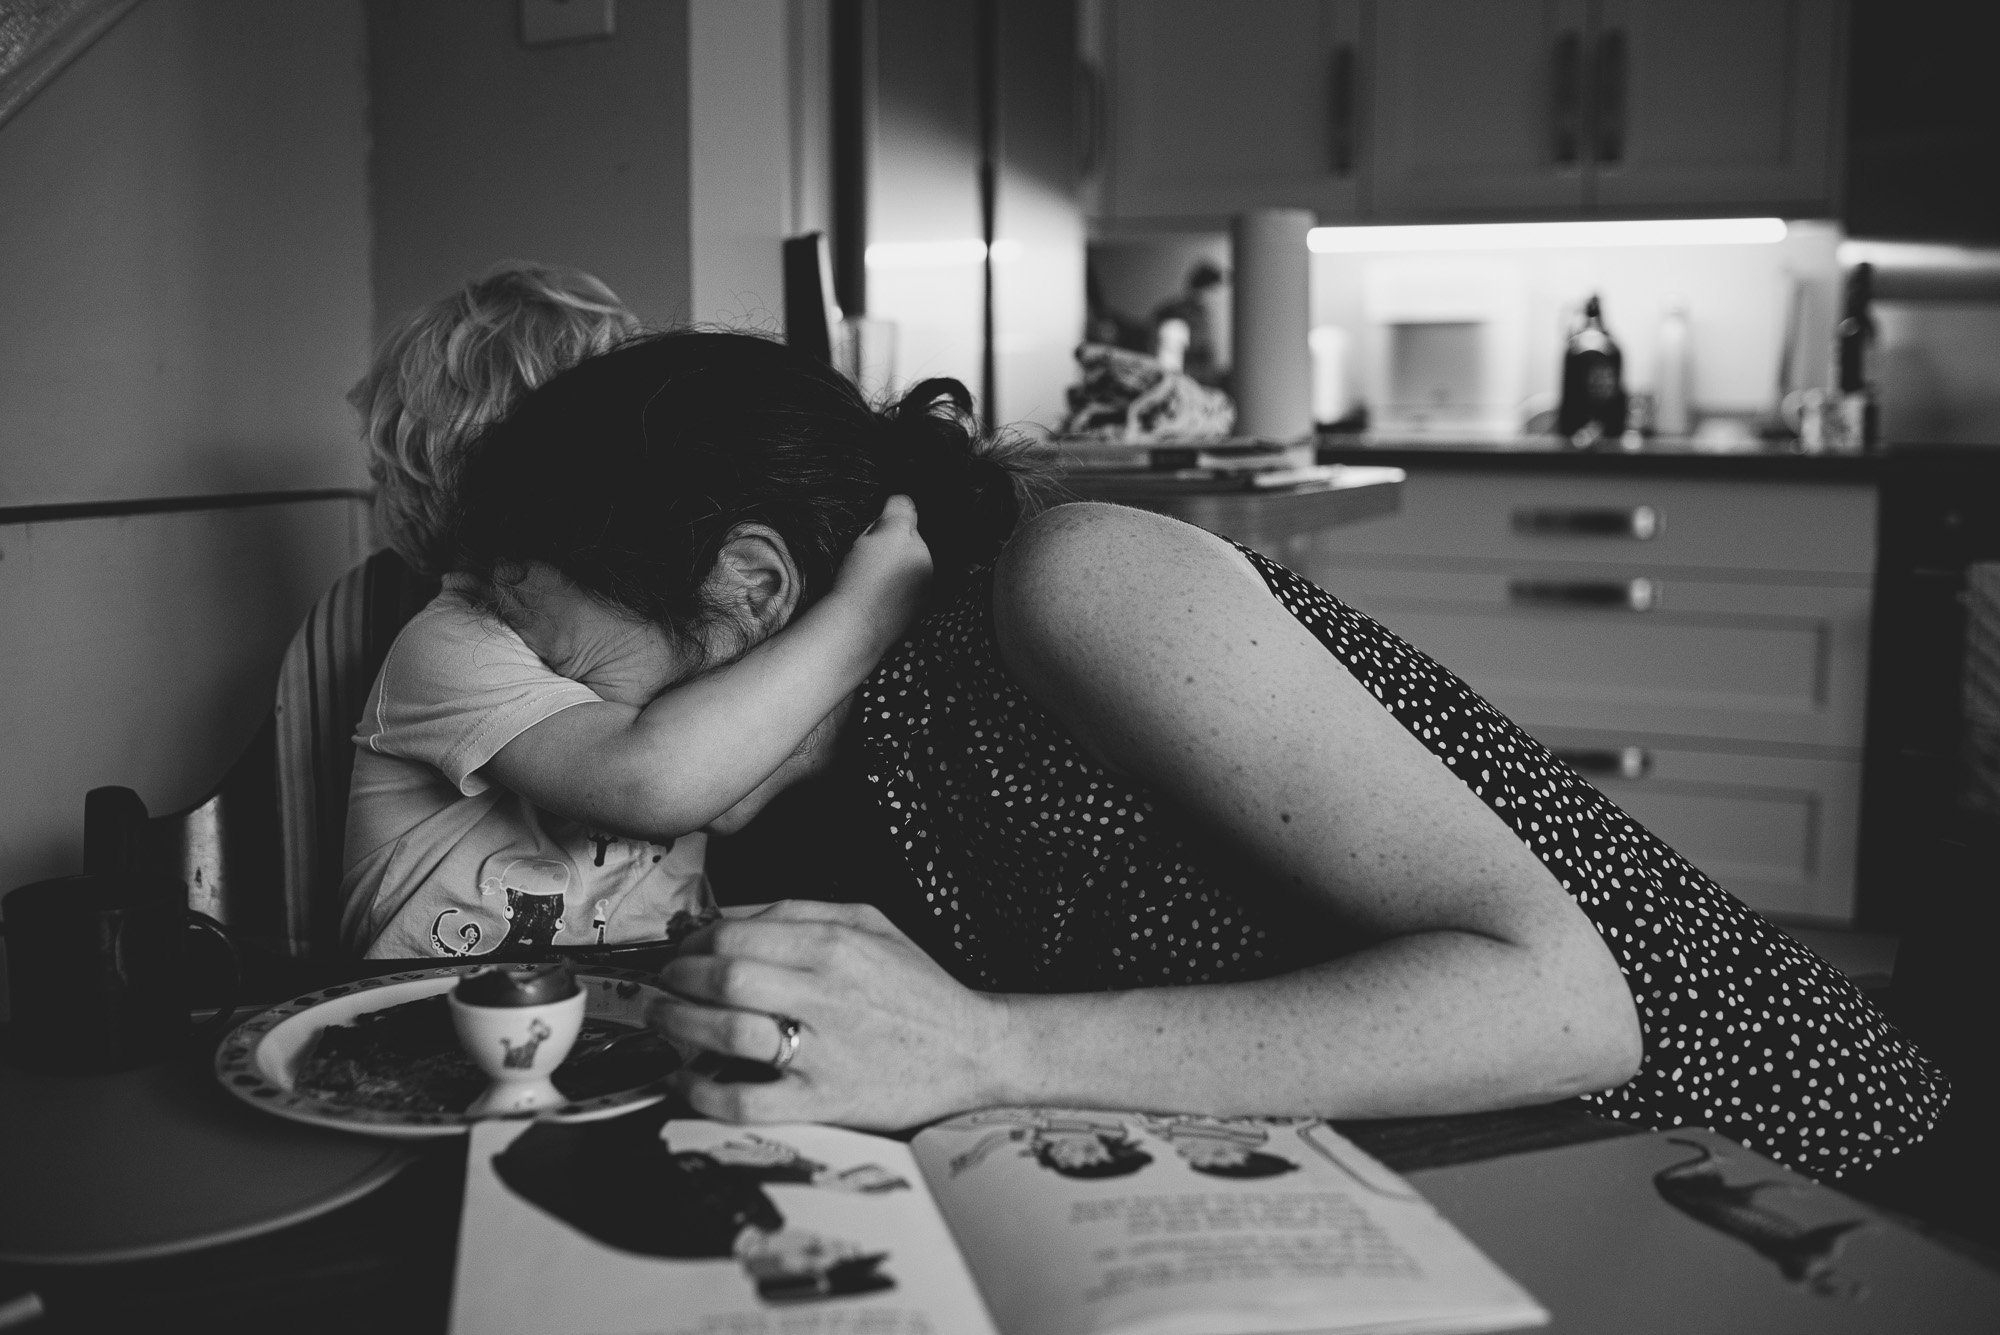 mum-hug-toddler-kitchen-table-lunch-family-documentary-photo-session-brighton-hove-sussex.jpg